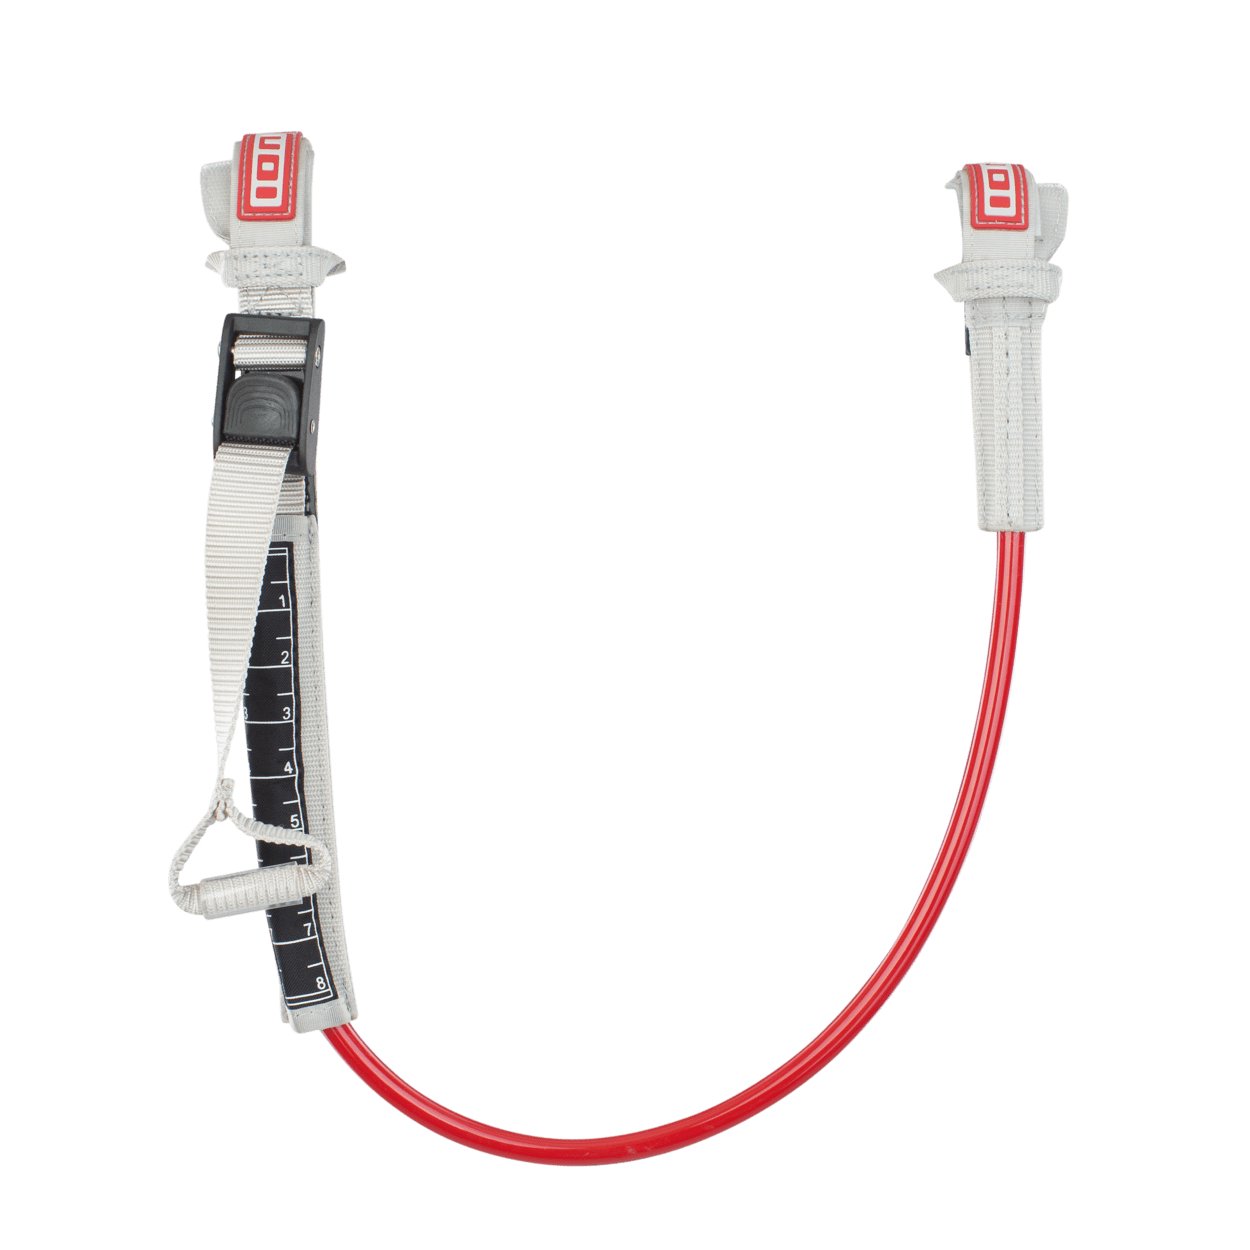 ION Windsurf Harness Line Vario 2022 - Worthing Watersports - 9008415960828 - Accessories - ION Water